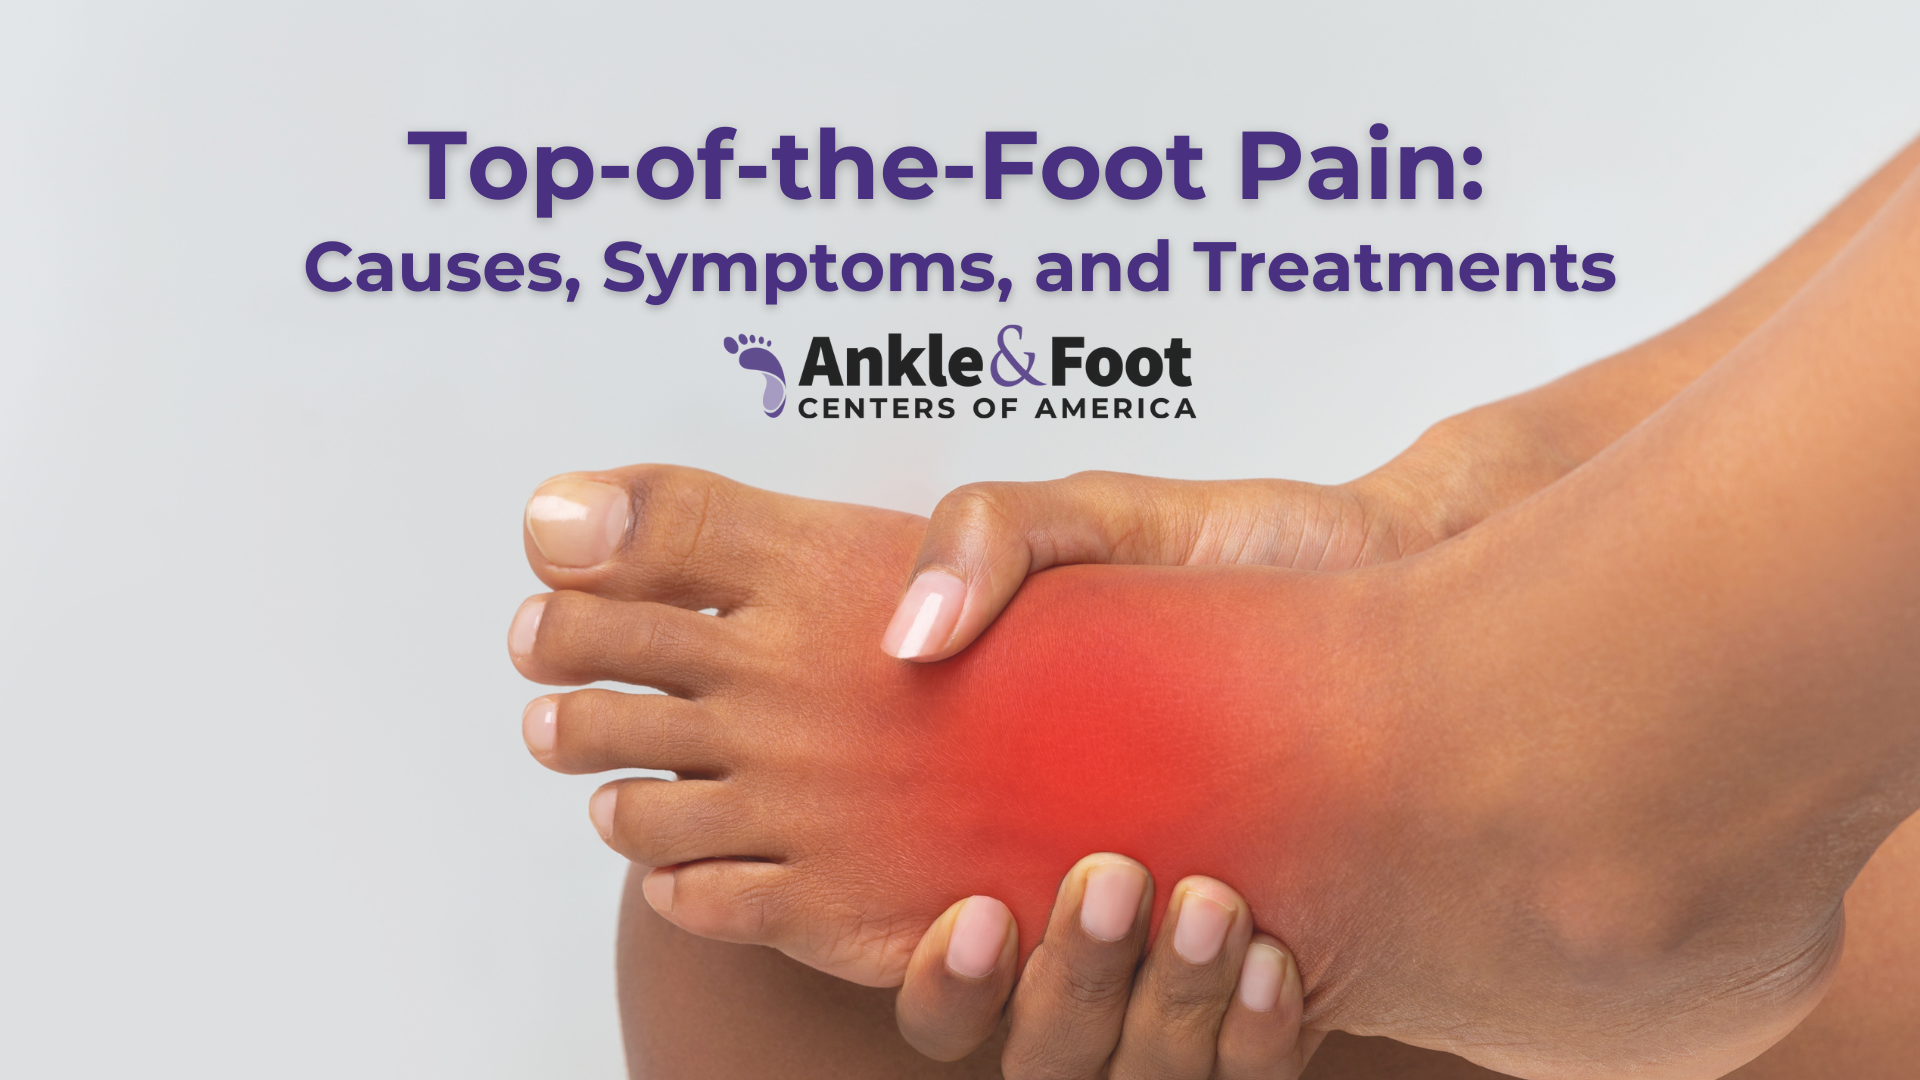 Toenail Pain: Causes, Treatment, and When to Seek Care